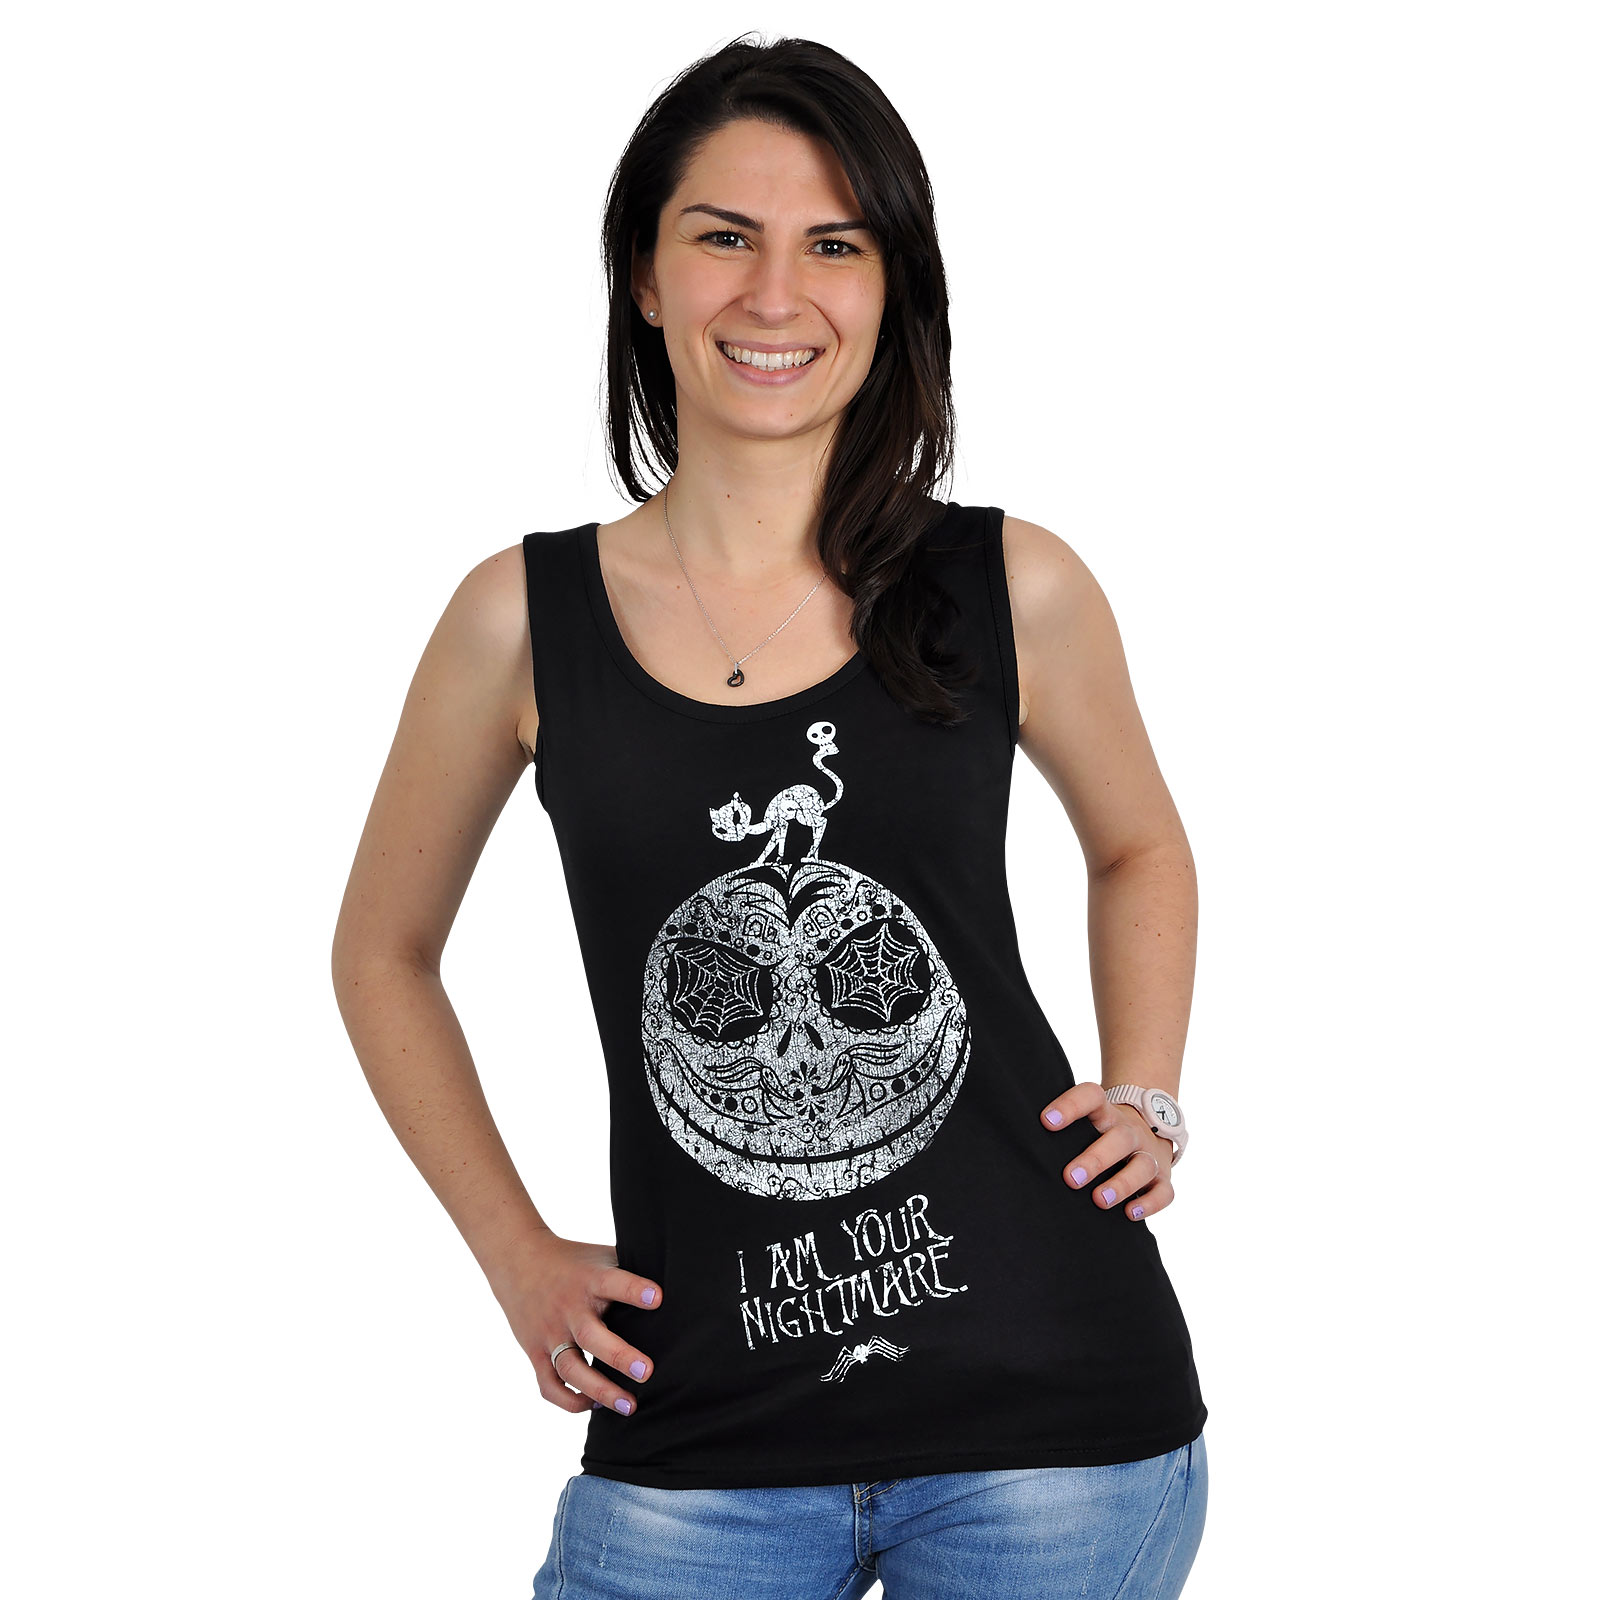 Nightmare Before Christmas - I'm Your Nightmare Lady Tank Top